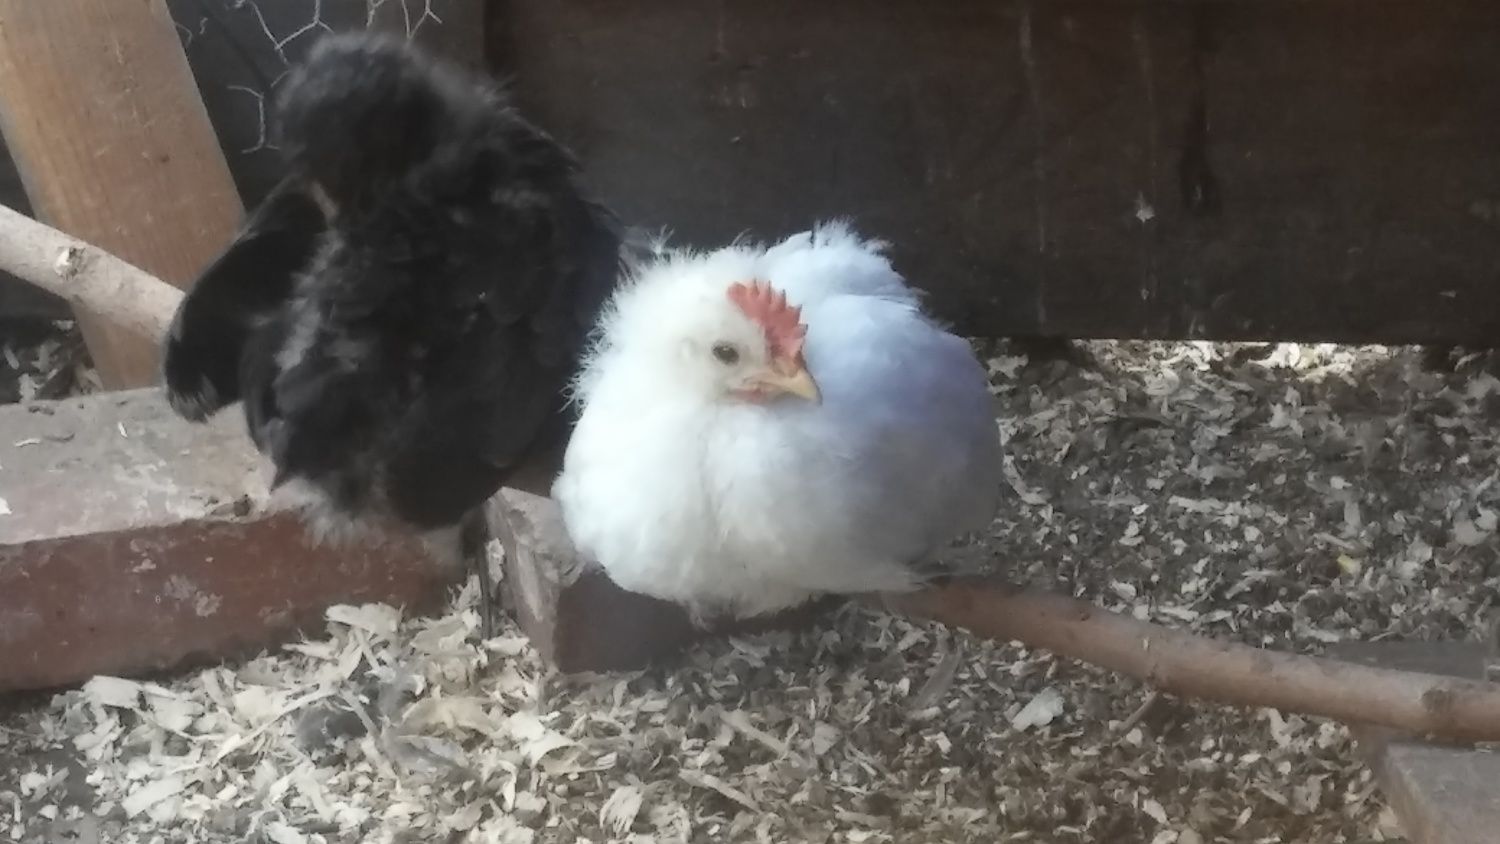 4.5 Week Old Sapphire (Super Blue Egg Layer) Cockerel or Pullet? - Page 2